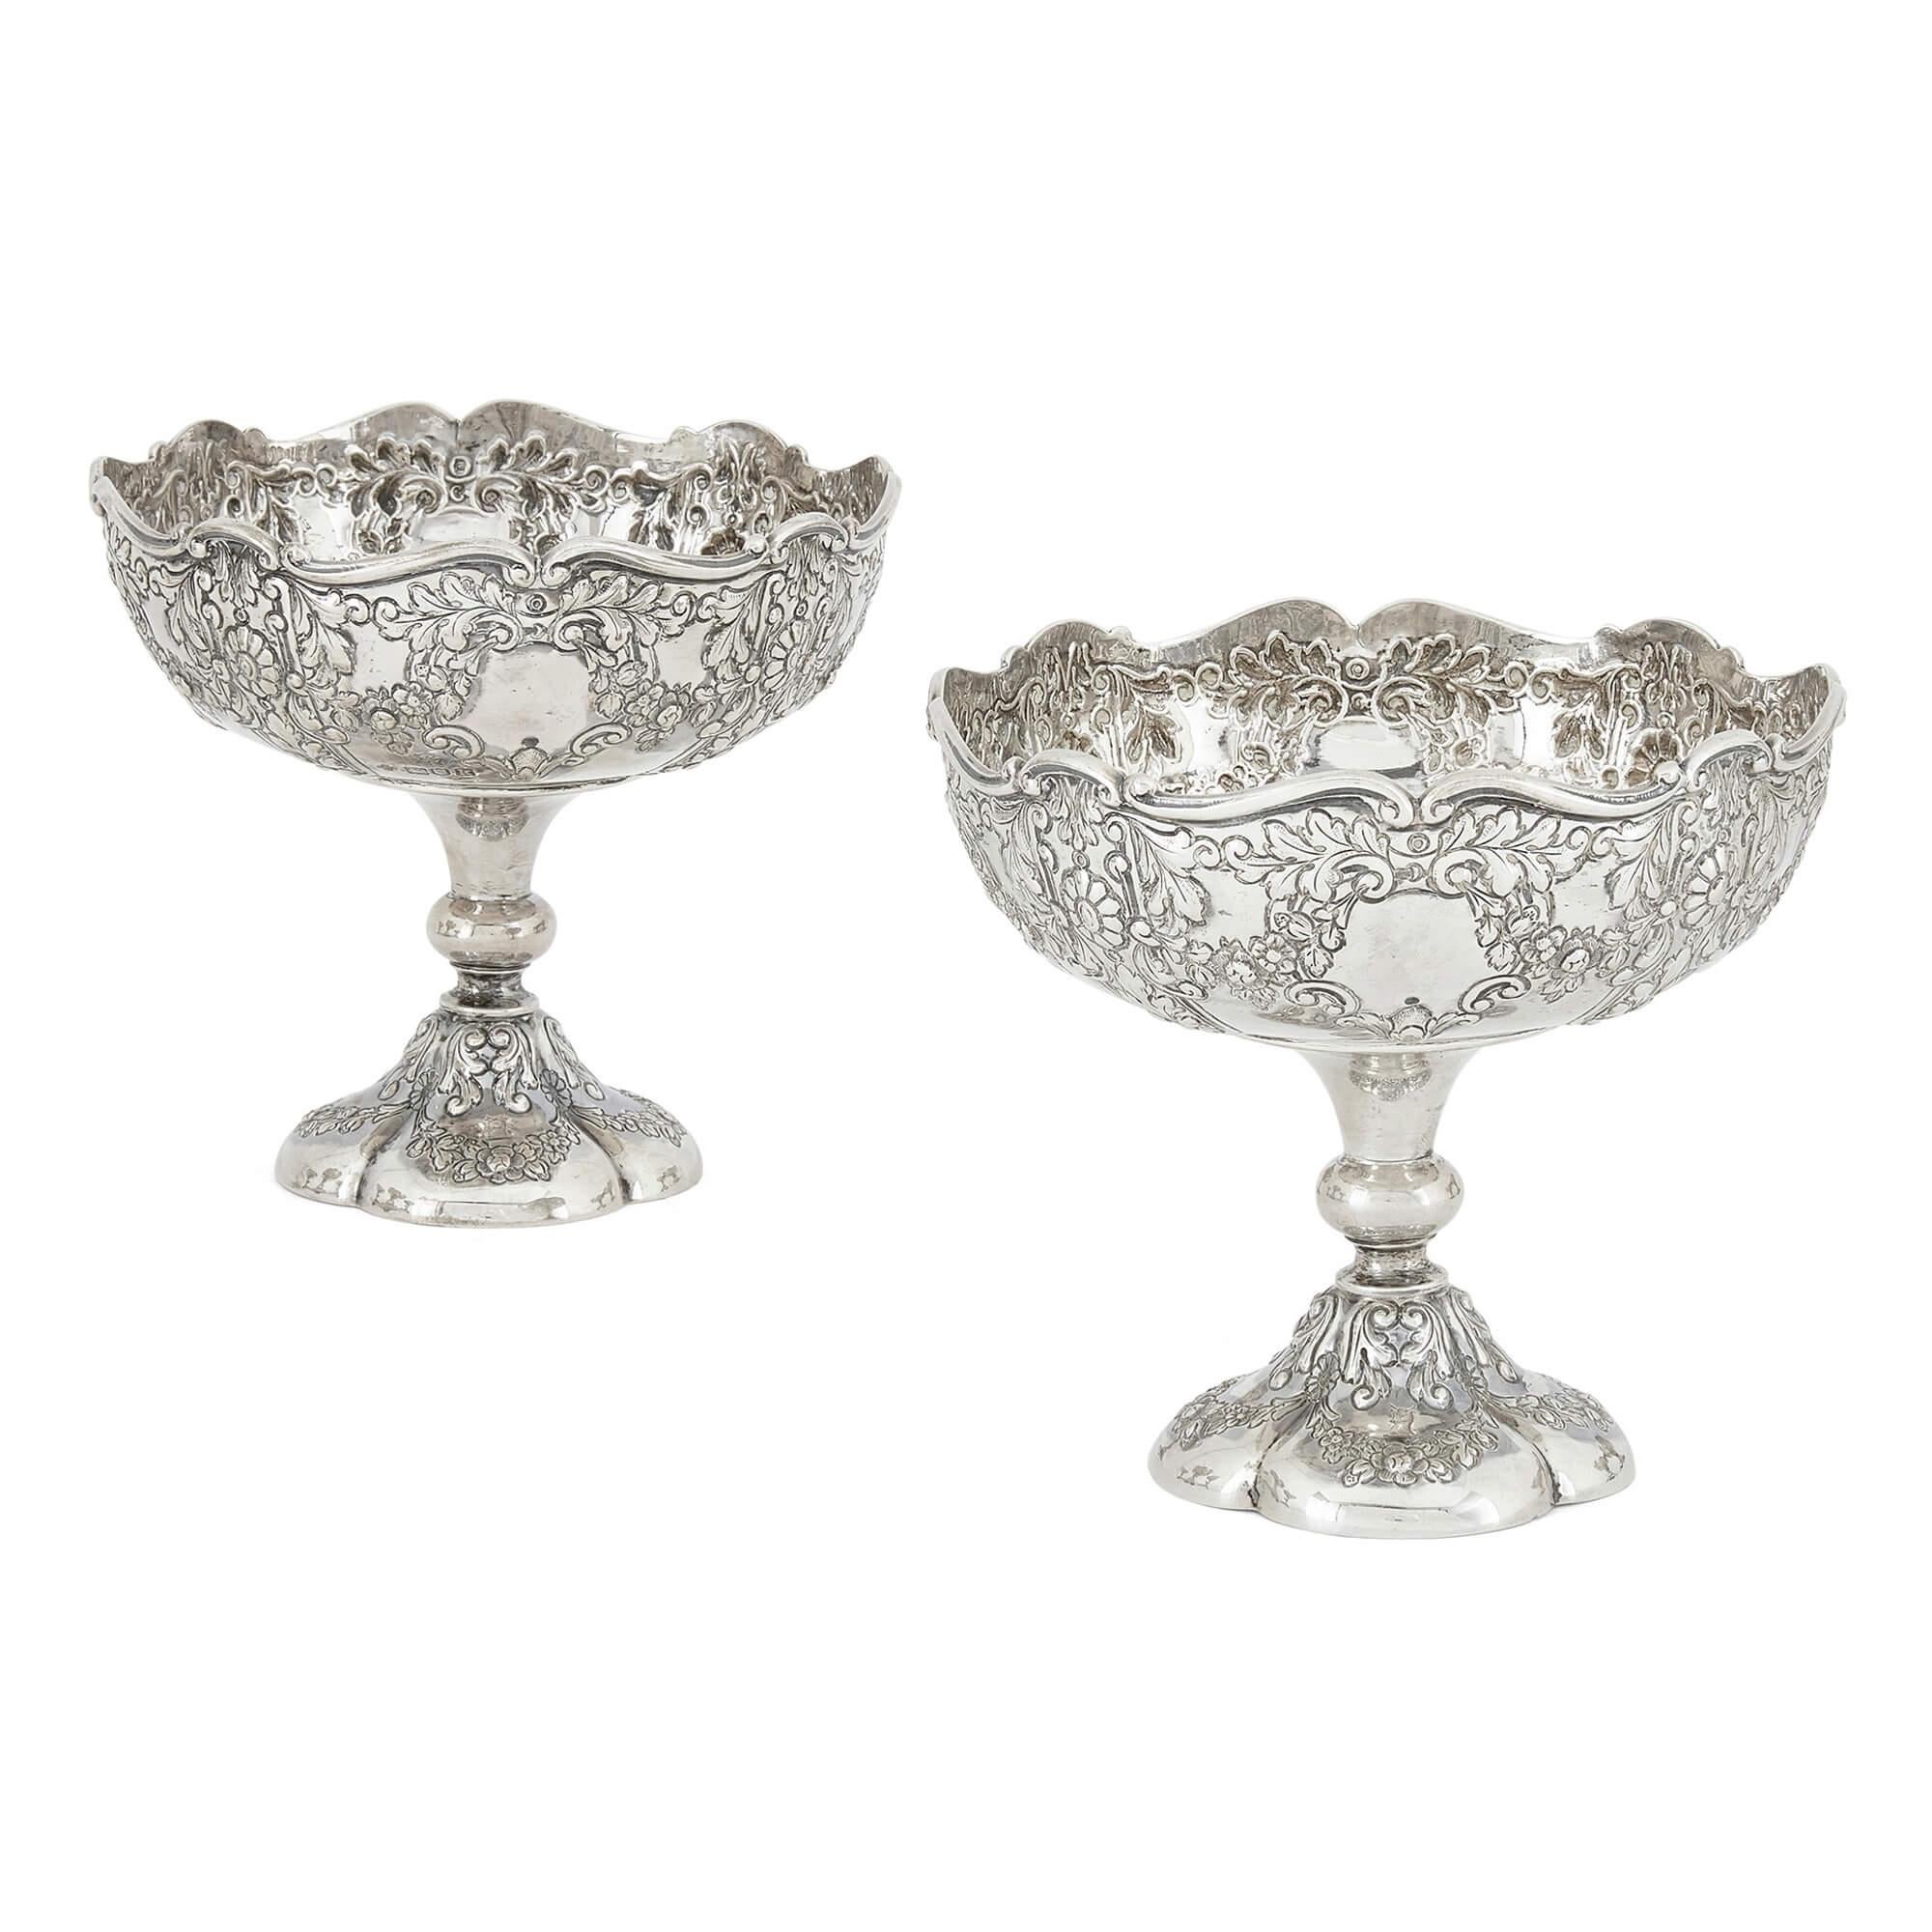 20th Century Edwardian Silver Centrepiece Suite by Horace Woodward & Co. London For Sale